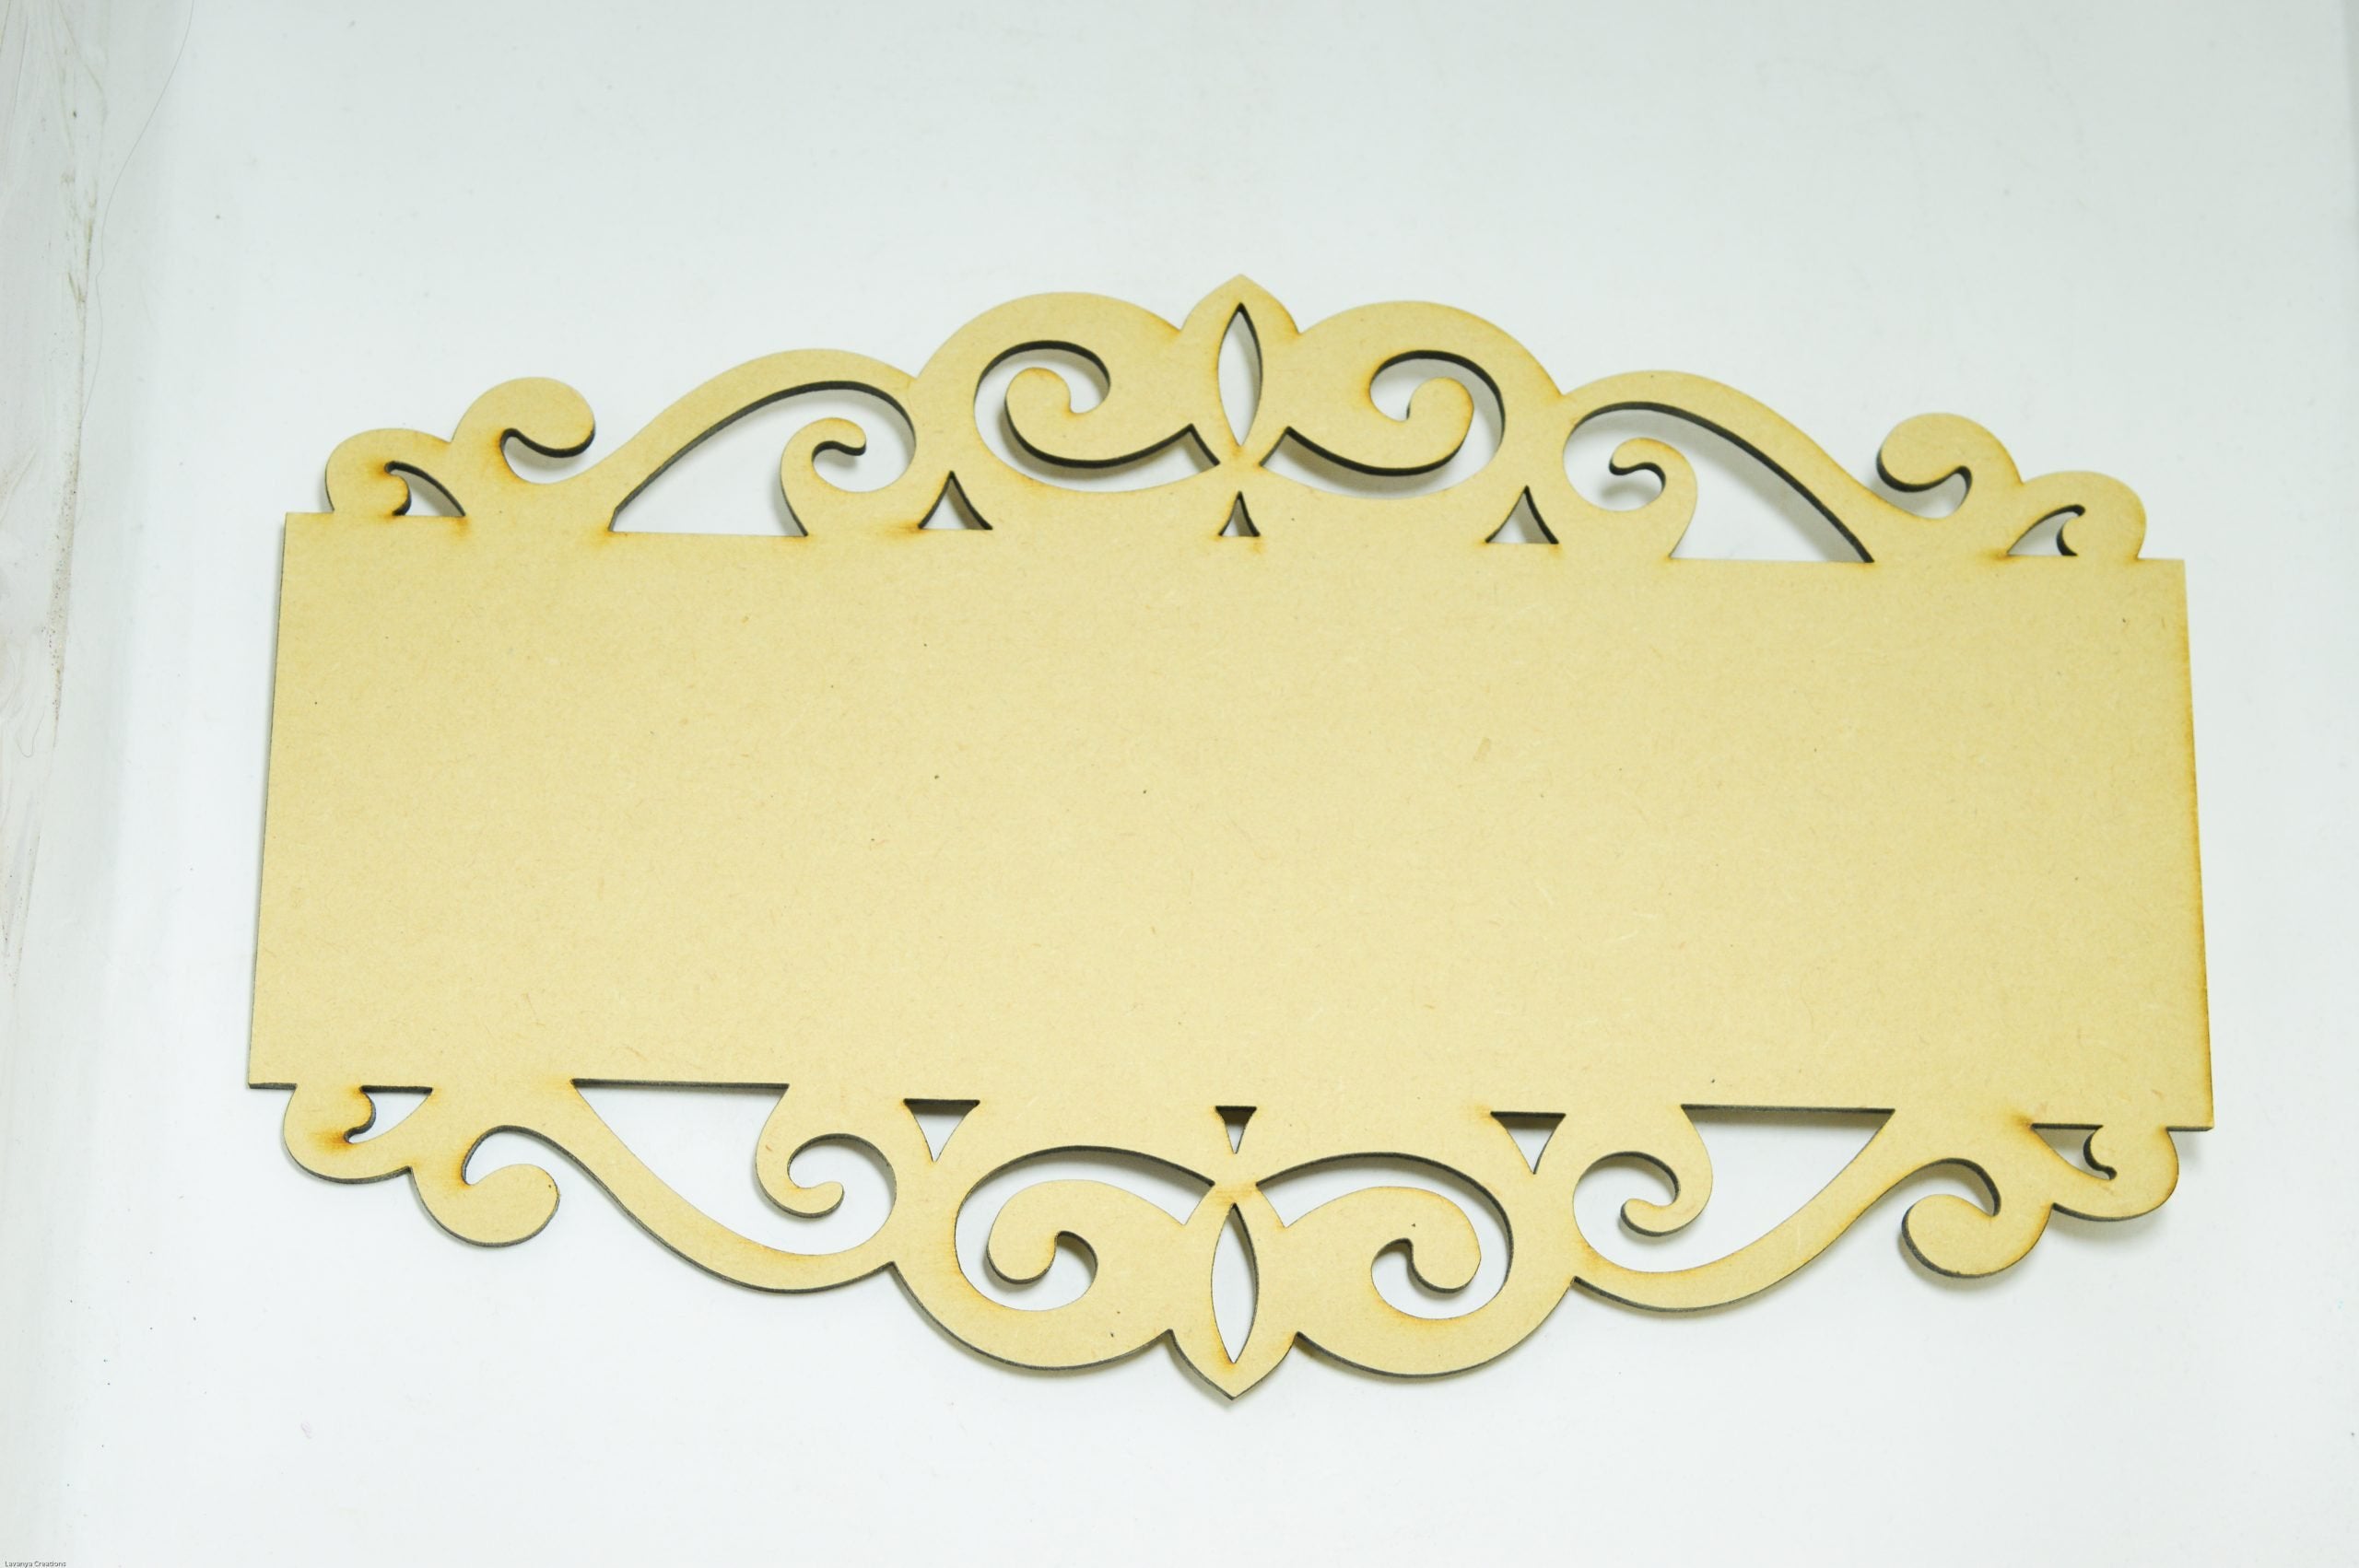 Premium Qualiy Raw MDF Wooden  Name Plate with both side Laser Cut design - 1 Pc.